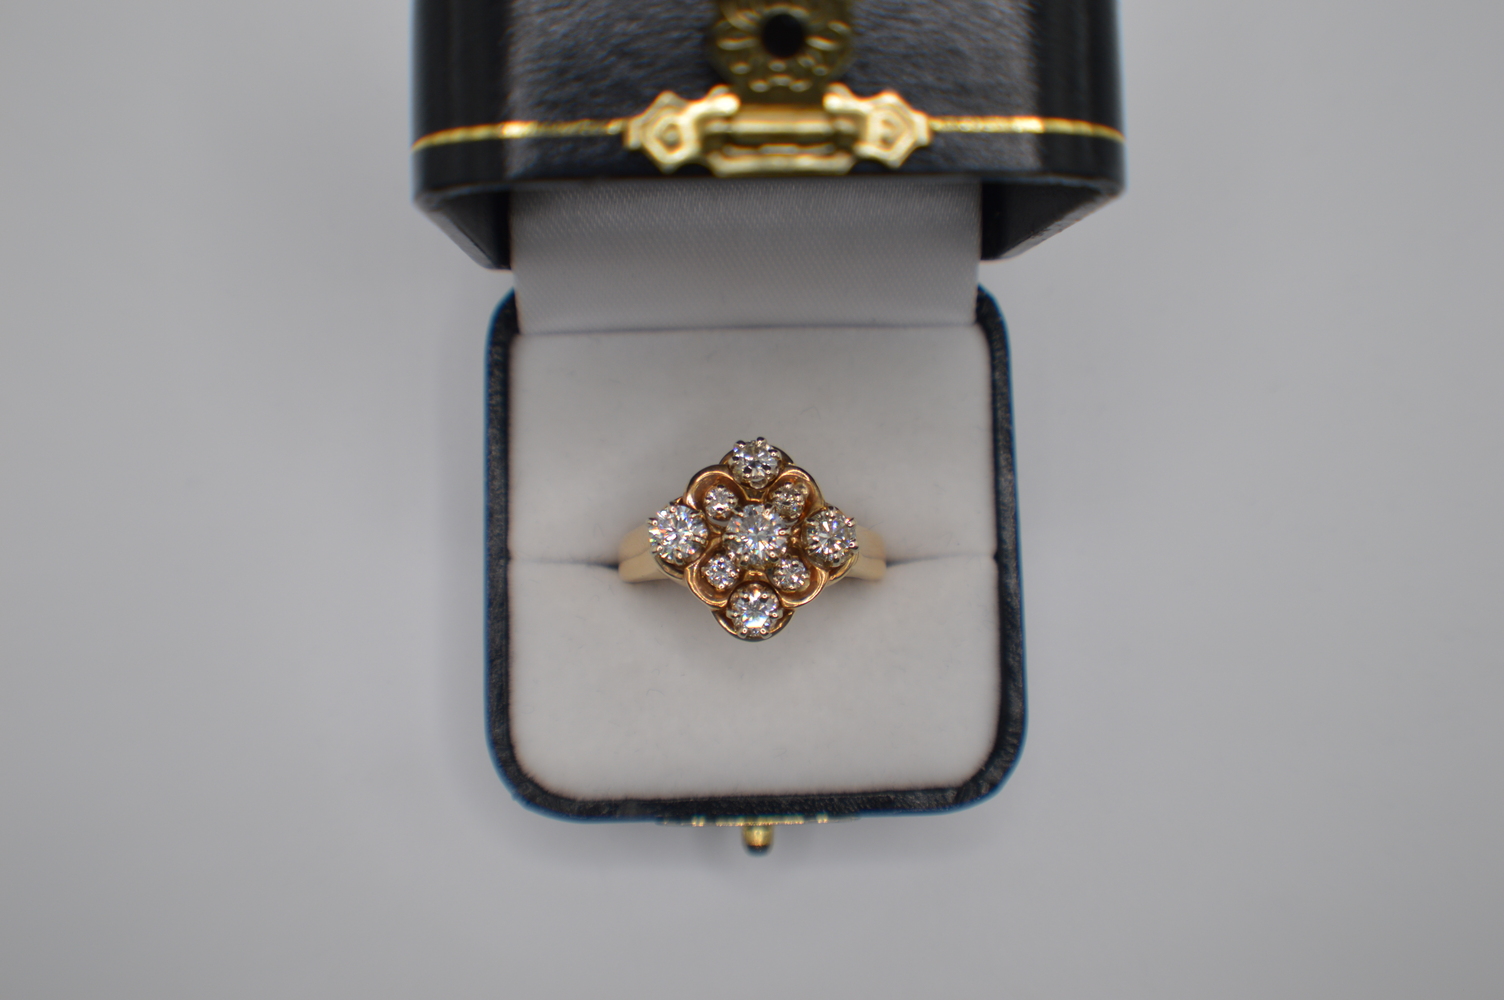  14kt  Yellow Gold Cluster Diamond Ring Approx 2.5 TDW $1250.00